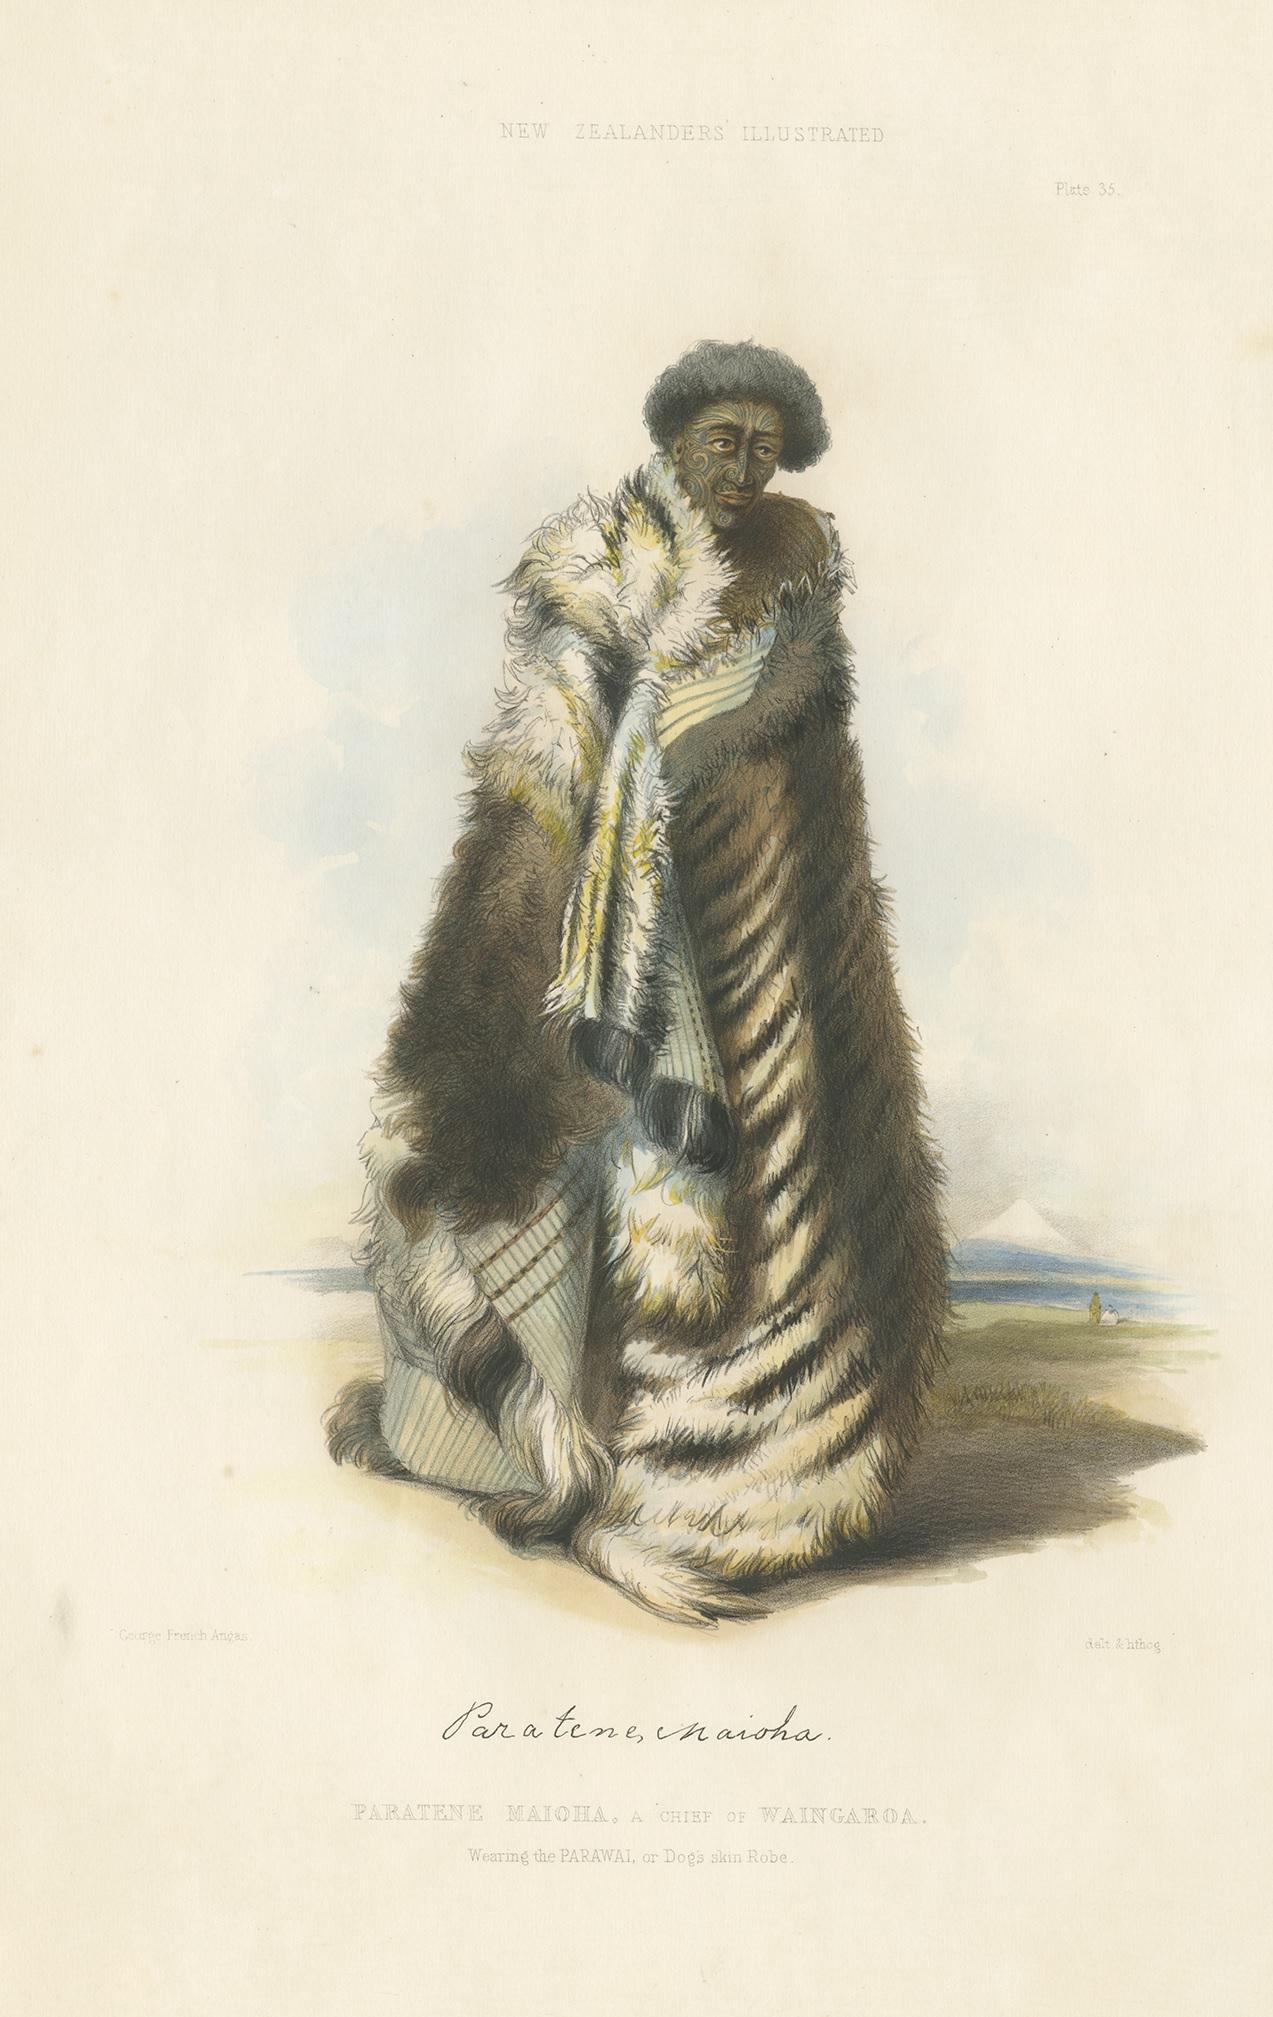 Antique print titled 'Paratene Maioha'. Lithograph of Paratene Maioha, a Chief of Waingaroa. Wearing the Parawai, or Dog's skin Robe. Paratene (Broughton) whose native name was Te Maioha, is a cousin of Te Wherowhero, and one of the leading men of